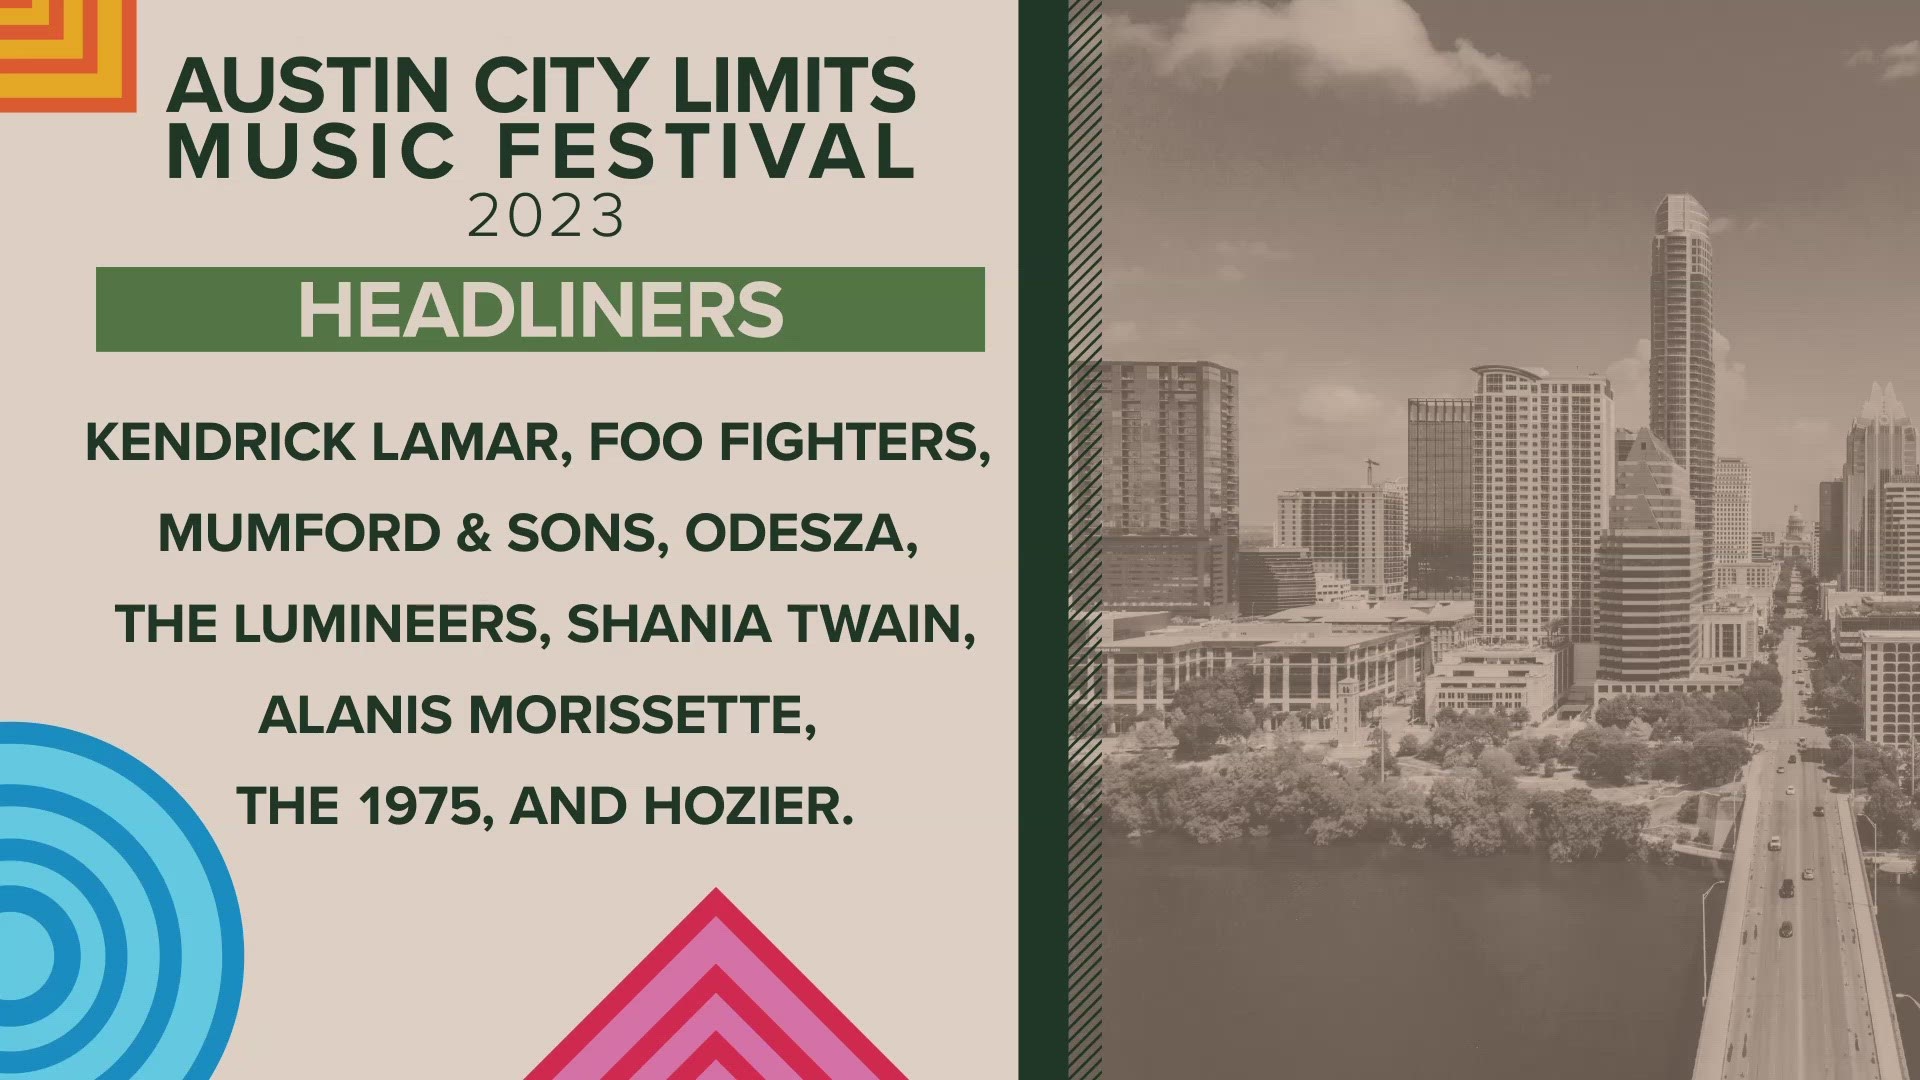 The lineup for the 2023 Austin City Limits Music Festival has been released!